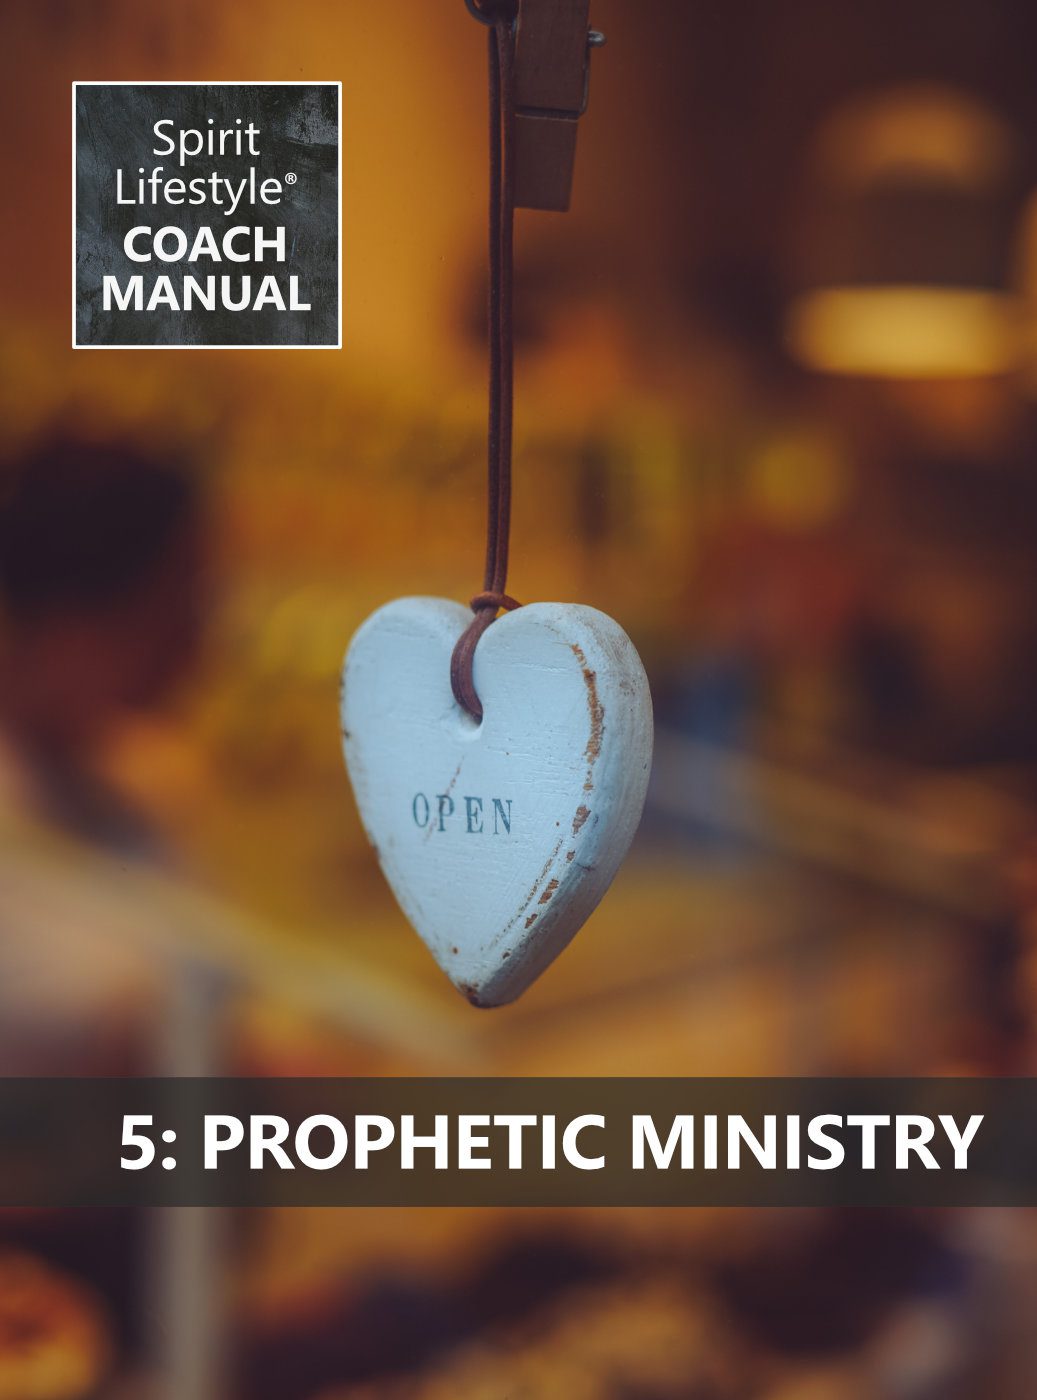 Spirit Lifestyle Coach Manual 05 Prophetic Ministry